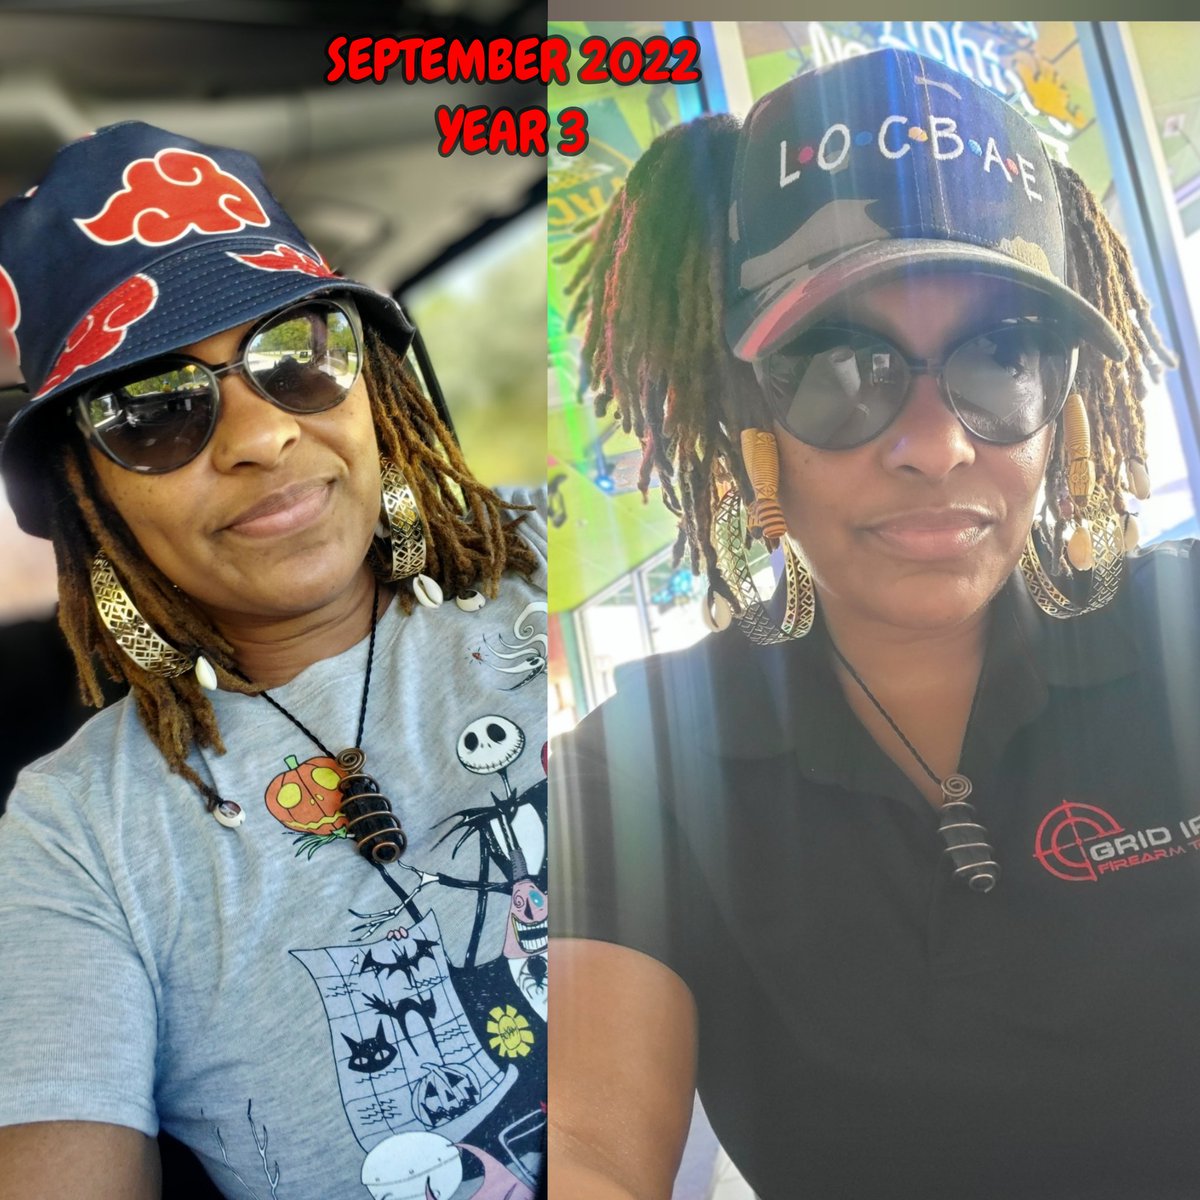 This has been 1 helluva journey! From coils to length and all worth it!

No extensions, just trusting the process and it has seriously made me a better person. 

Year 4 in comments ...

#DemVannLocs #DemVannGirls #locjourney #locklife #loclife #4yearlocversary #ImAllIn